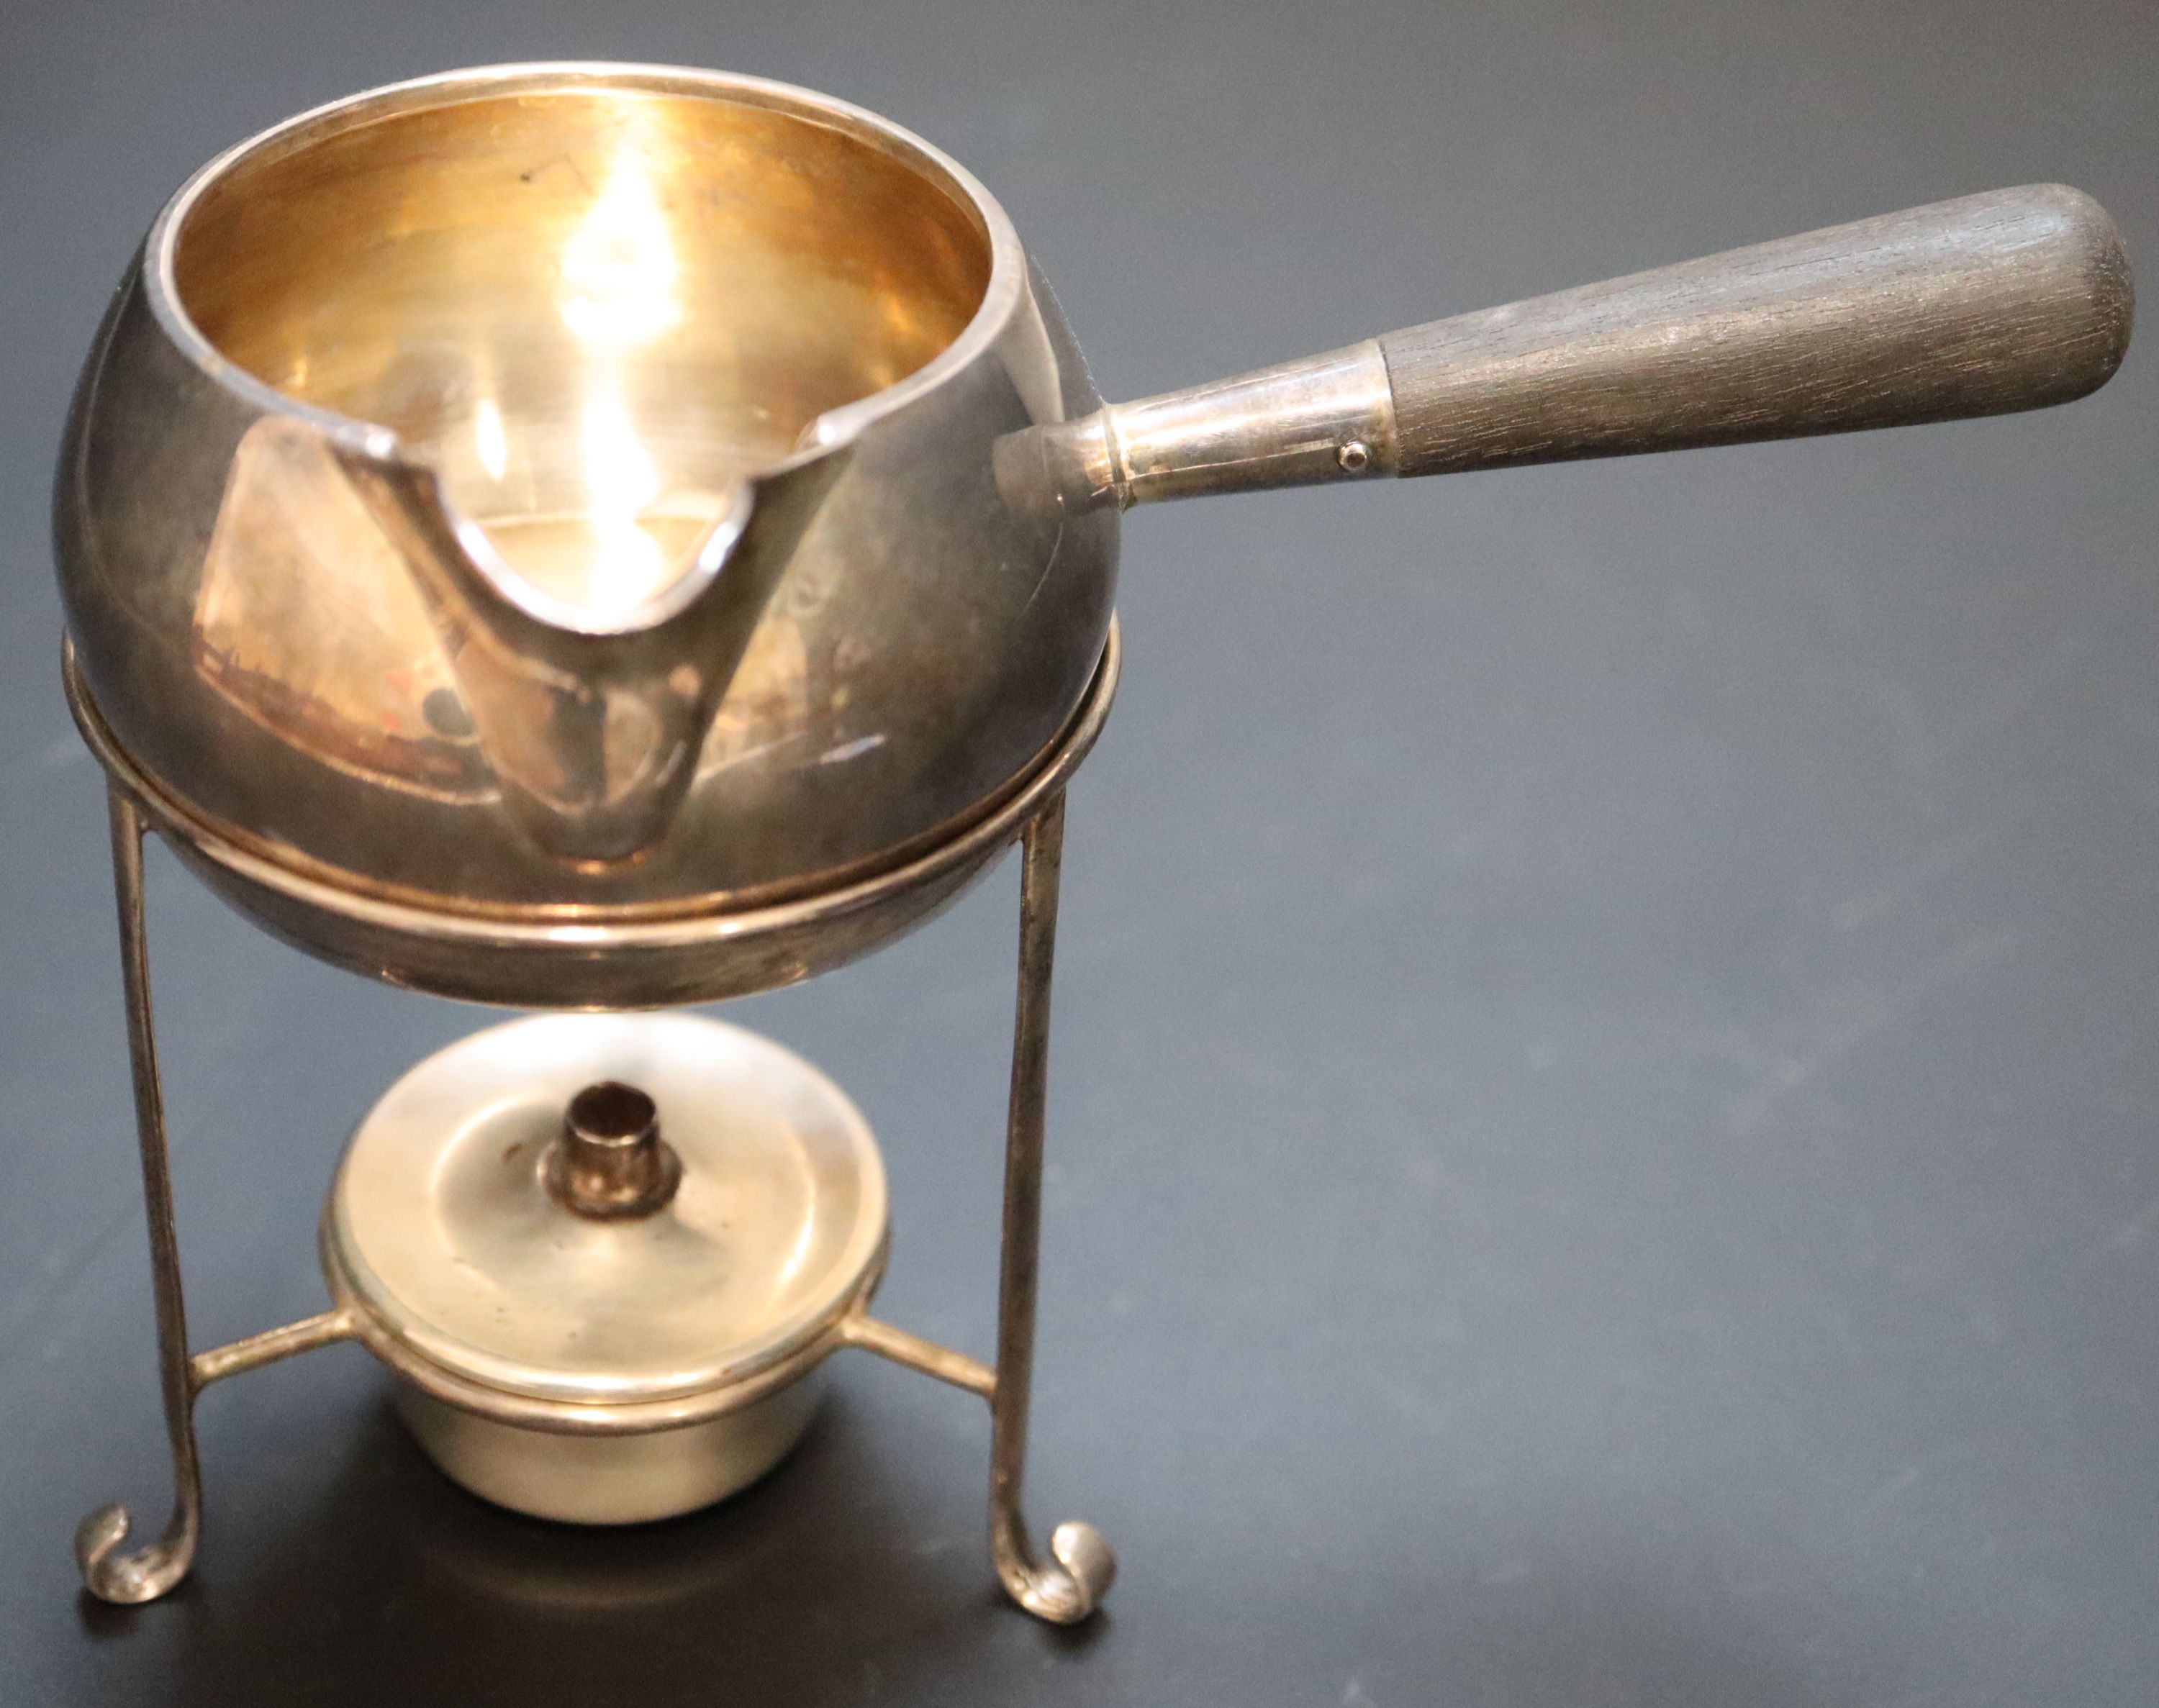 An Edwardian silver brandy warmer and stand with burner, height 11.4cm, gross 5.5oz.